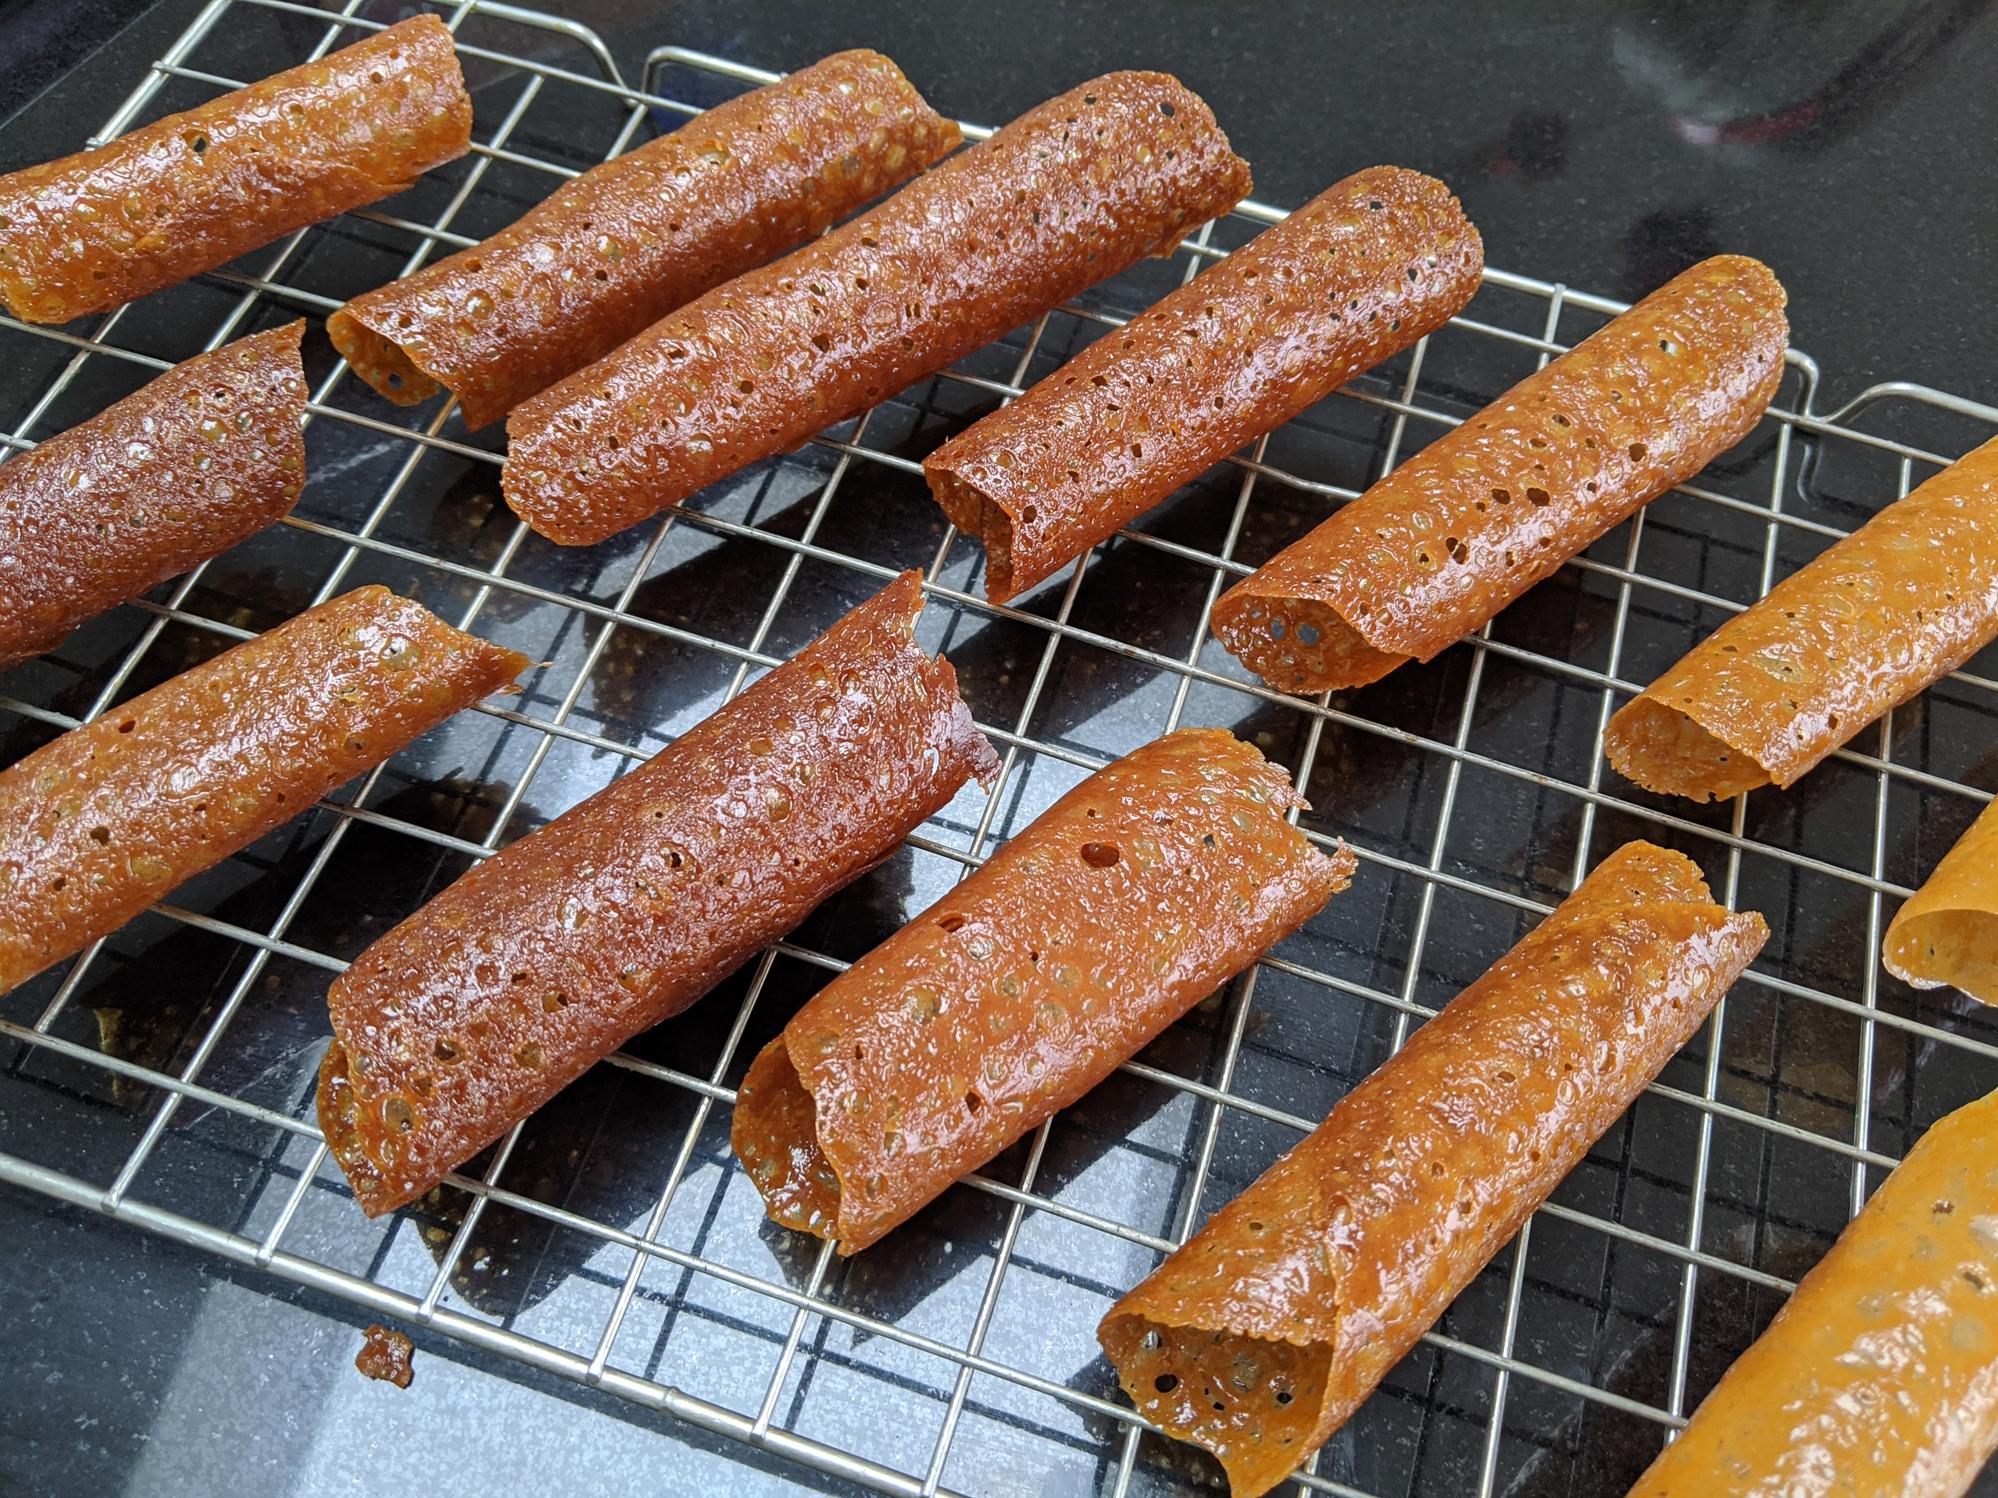  Craving something sweet and crunchy? Brandy snaps to the rescue!